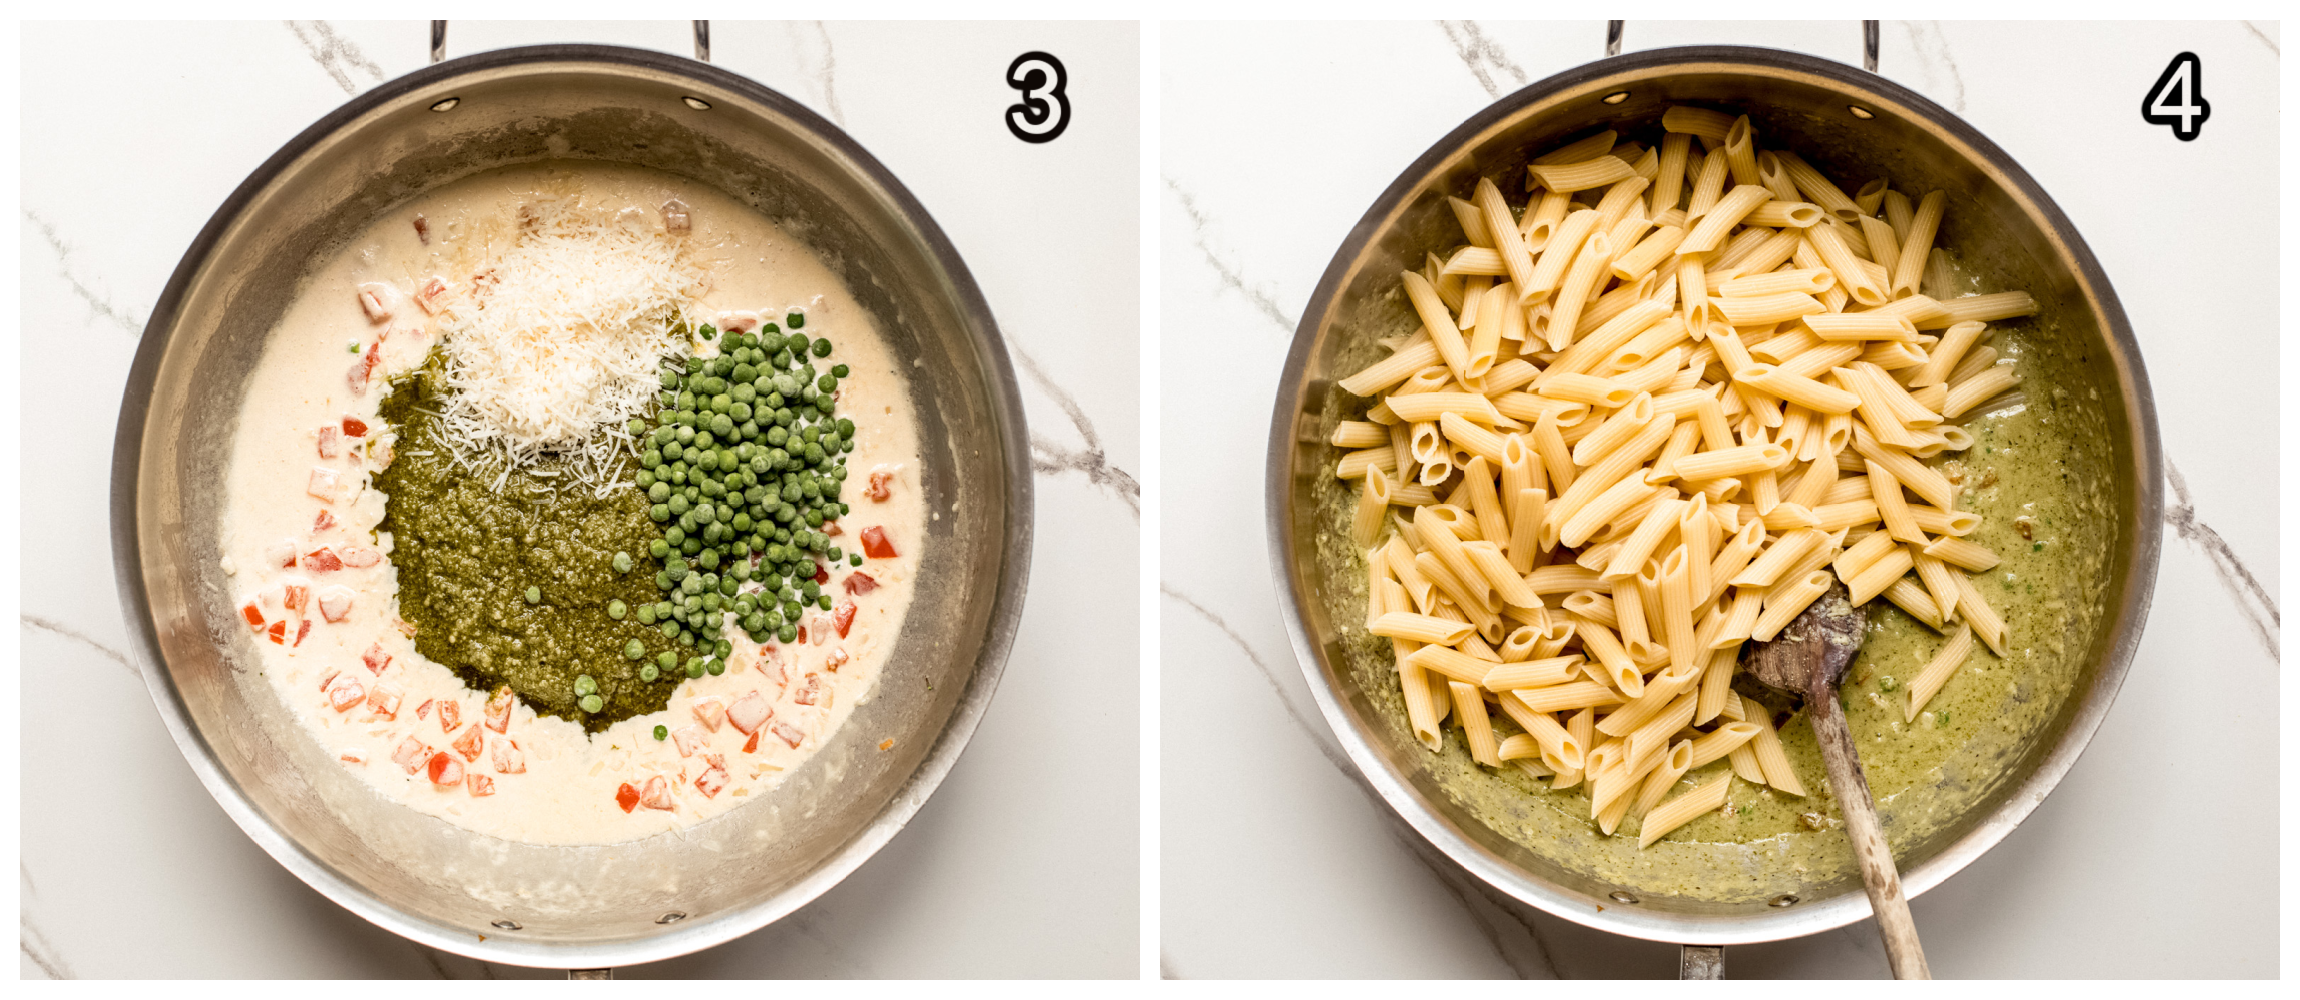 two skillet photos showing pesto with peas and cream in one, and sauce with penne pasta in second.